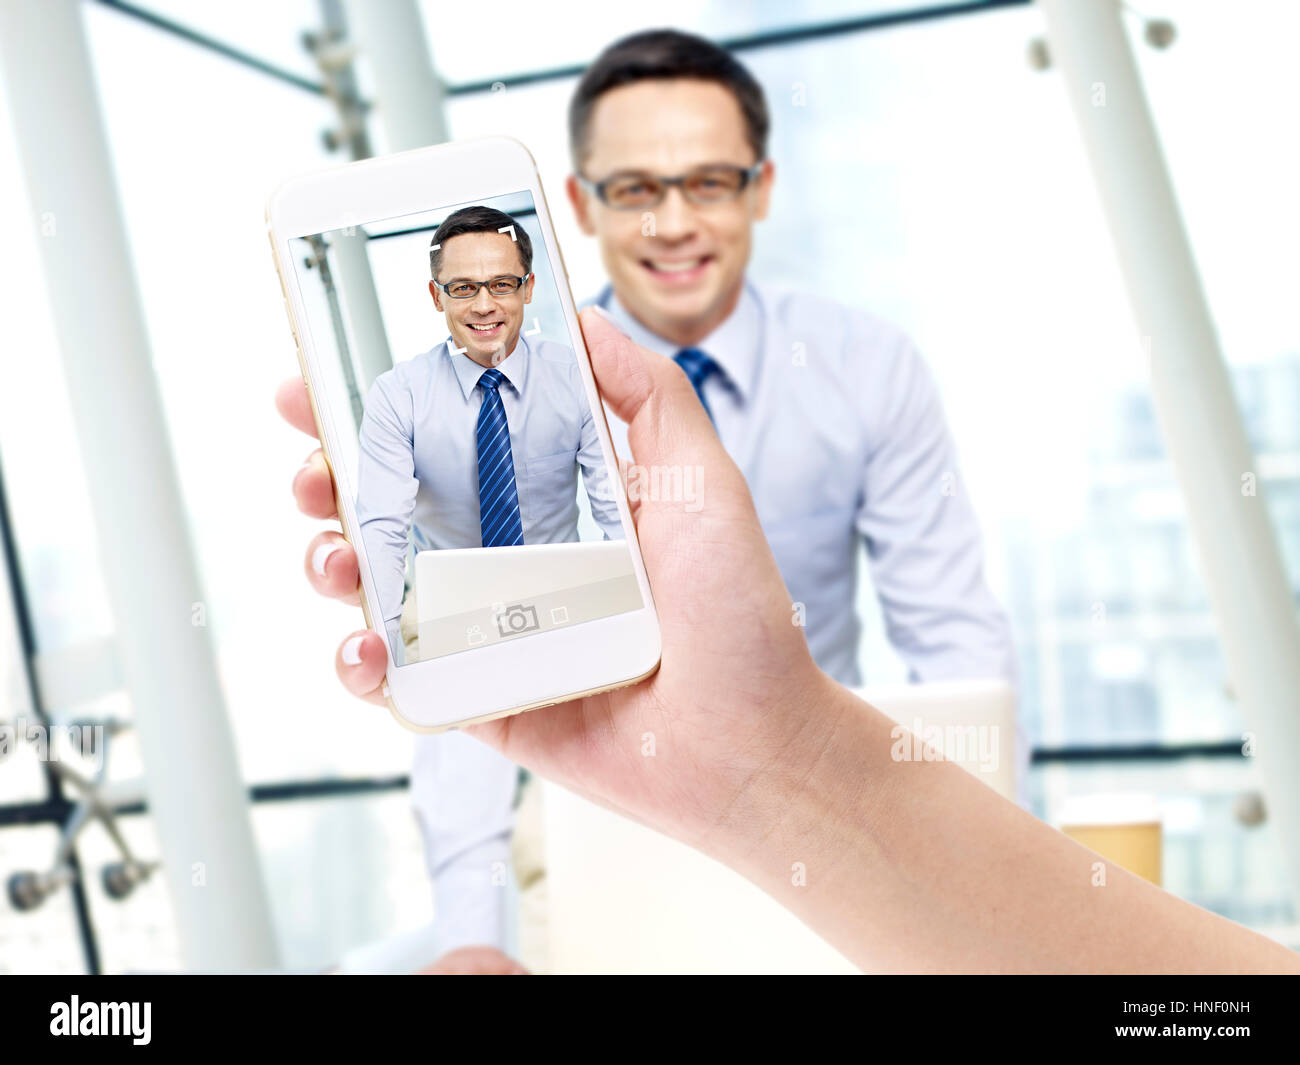 hand of a female holding a cellphone taking a picture of a smiling business man in office. Stock Photo